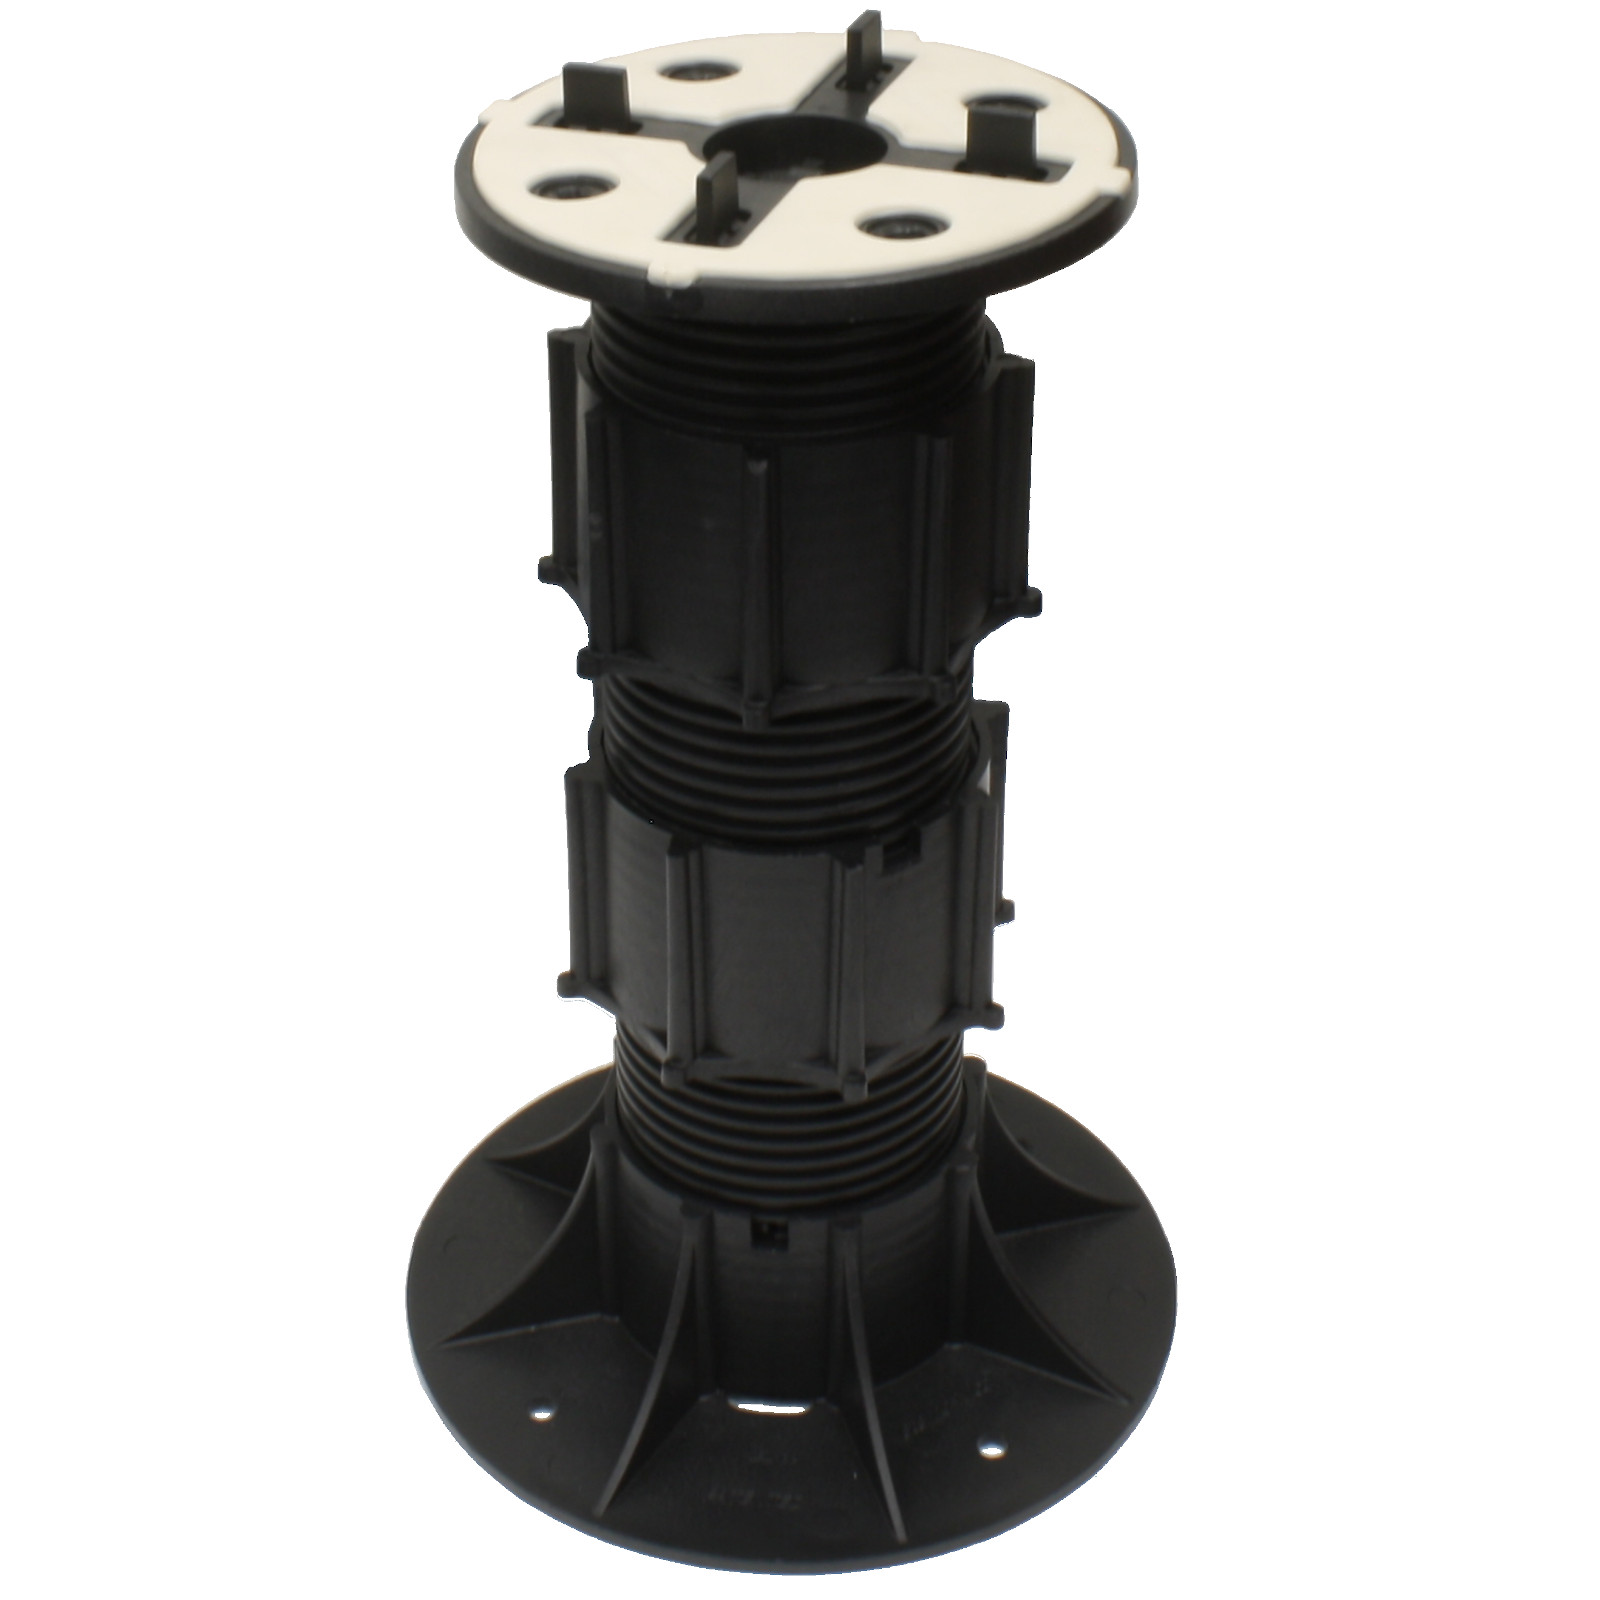 SE9 Adj Ped Support w/ Three-in-One Self Leveling Head 8” ‐ 13.5” (205‐345Mm)